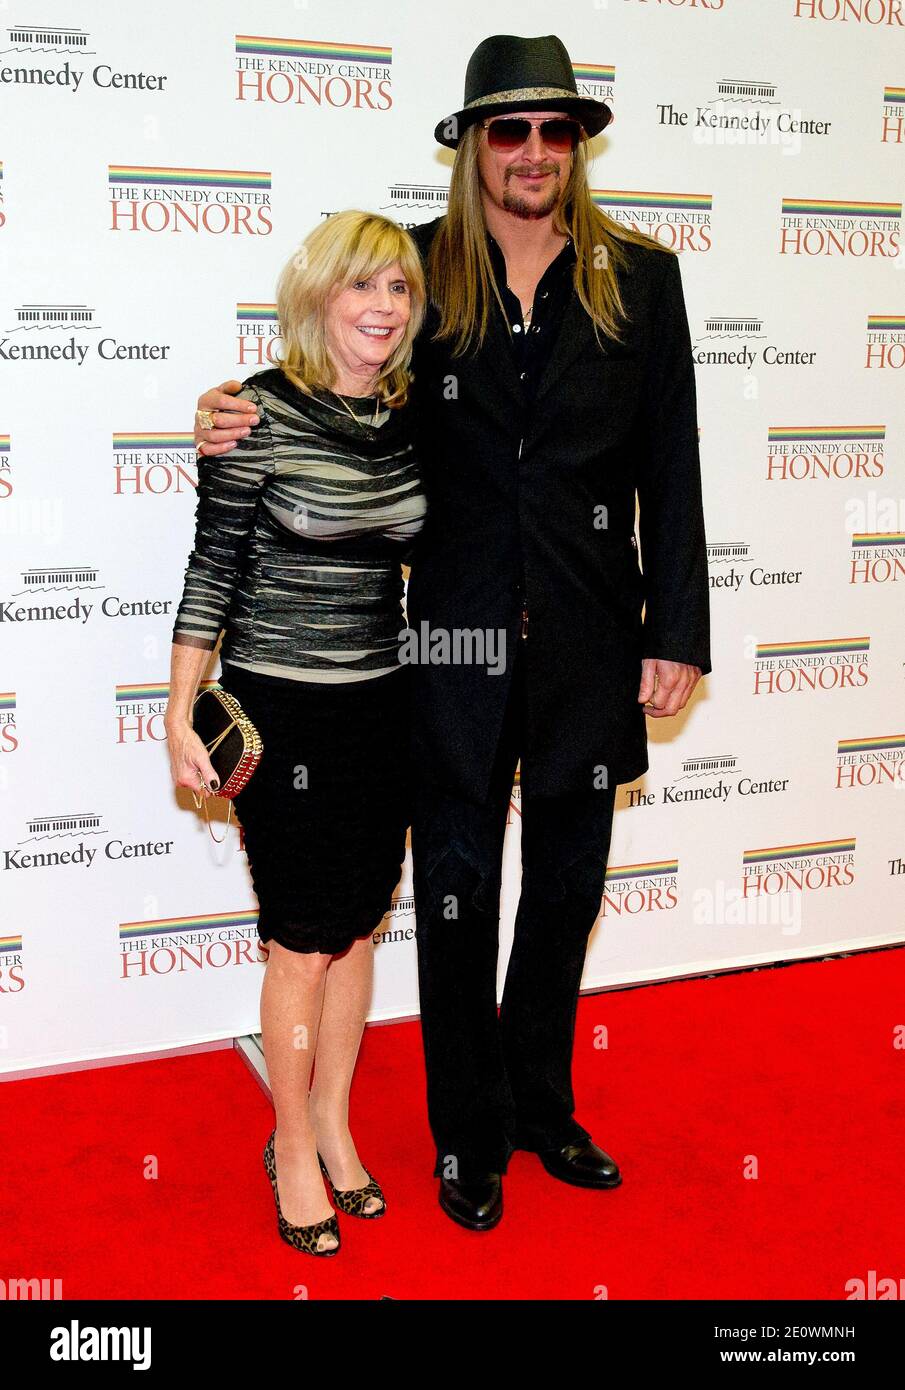 Robert 'Kid Rock' Ritchie and his Mom, Susan Ritchie, arrive for the formal Artist's Dinner honoring the recipients of the 2012 Kennedy Center Honors hosted by United States Secretary of State Hillary Rodham Clinton at the U.S. Department of State in Washington, DC, USA, on December 01, 2012. The 2012 honorees are Buddy Guy, actor Dustin Hoffman, late-night host David Letterman, dancer Natalia Makarova, and the British rock band Led Zeppelin. Photo by Ron Sachs/ABACAPRESS.COM Stock Photo